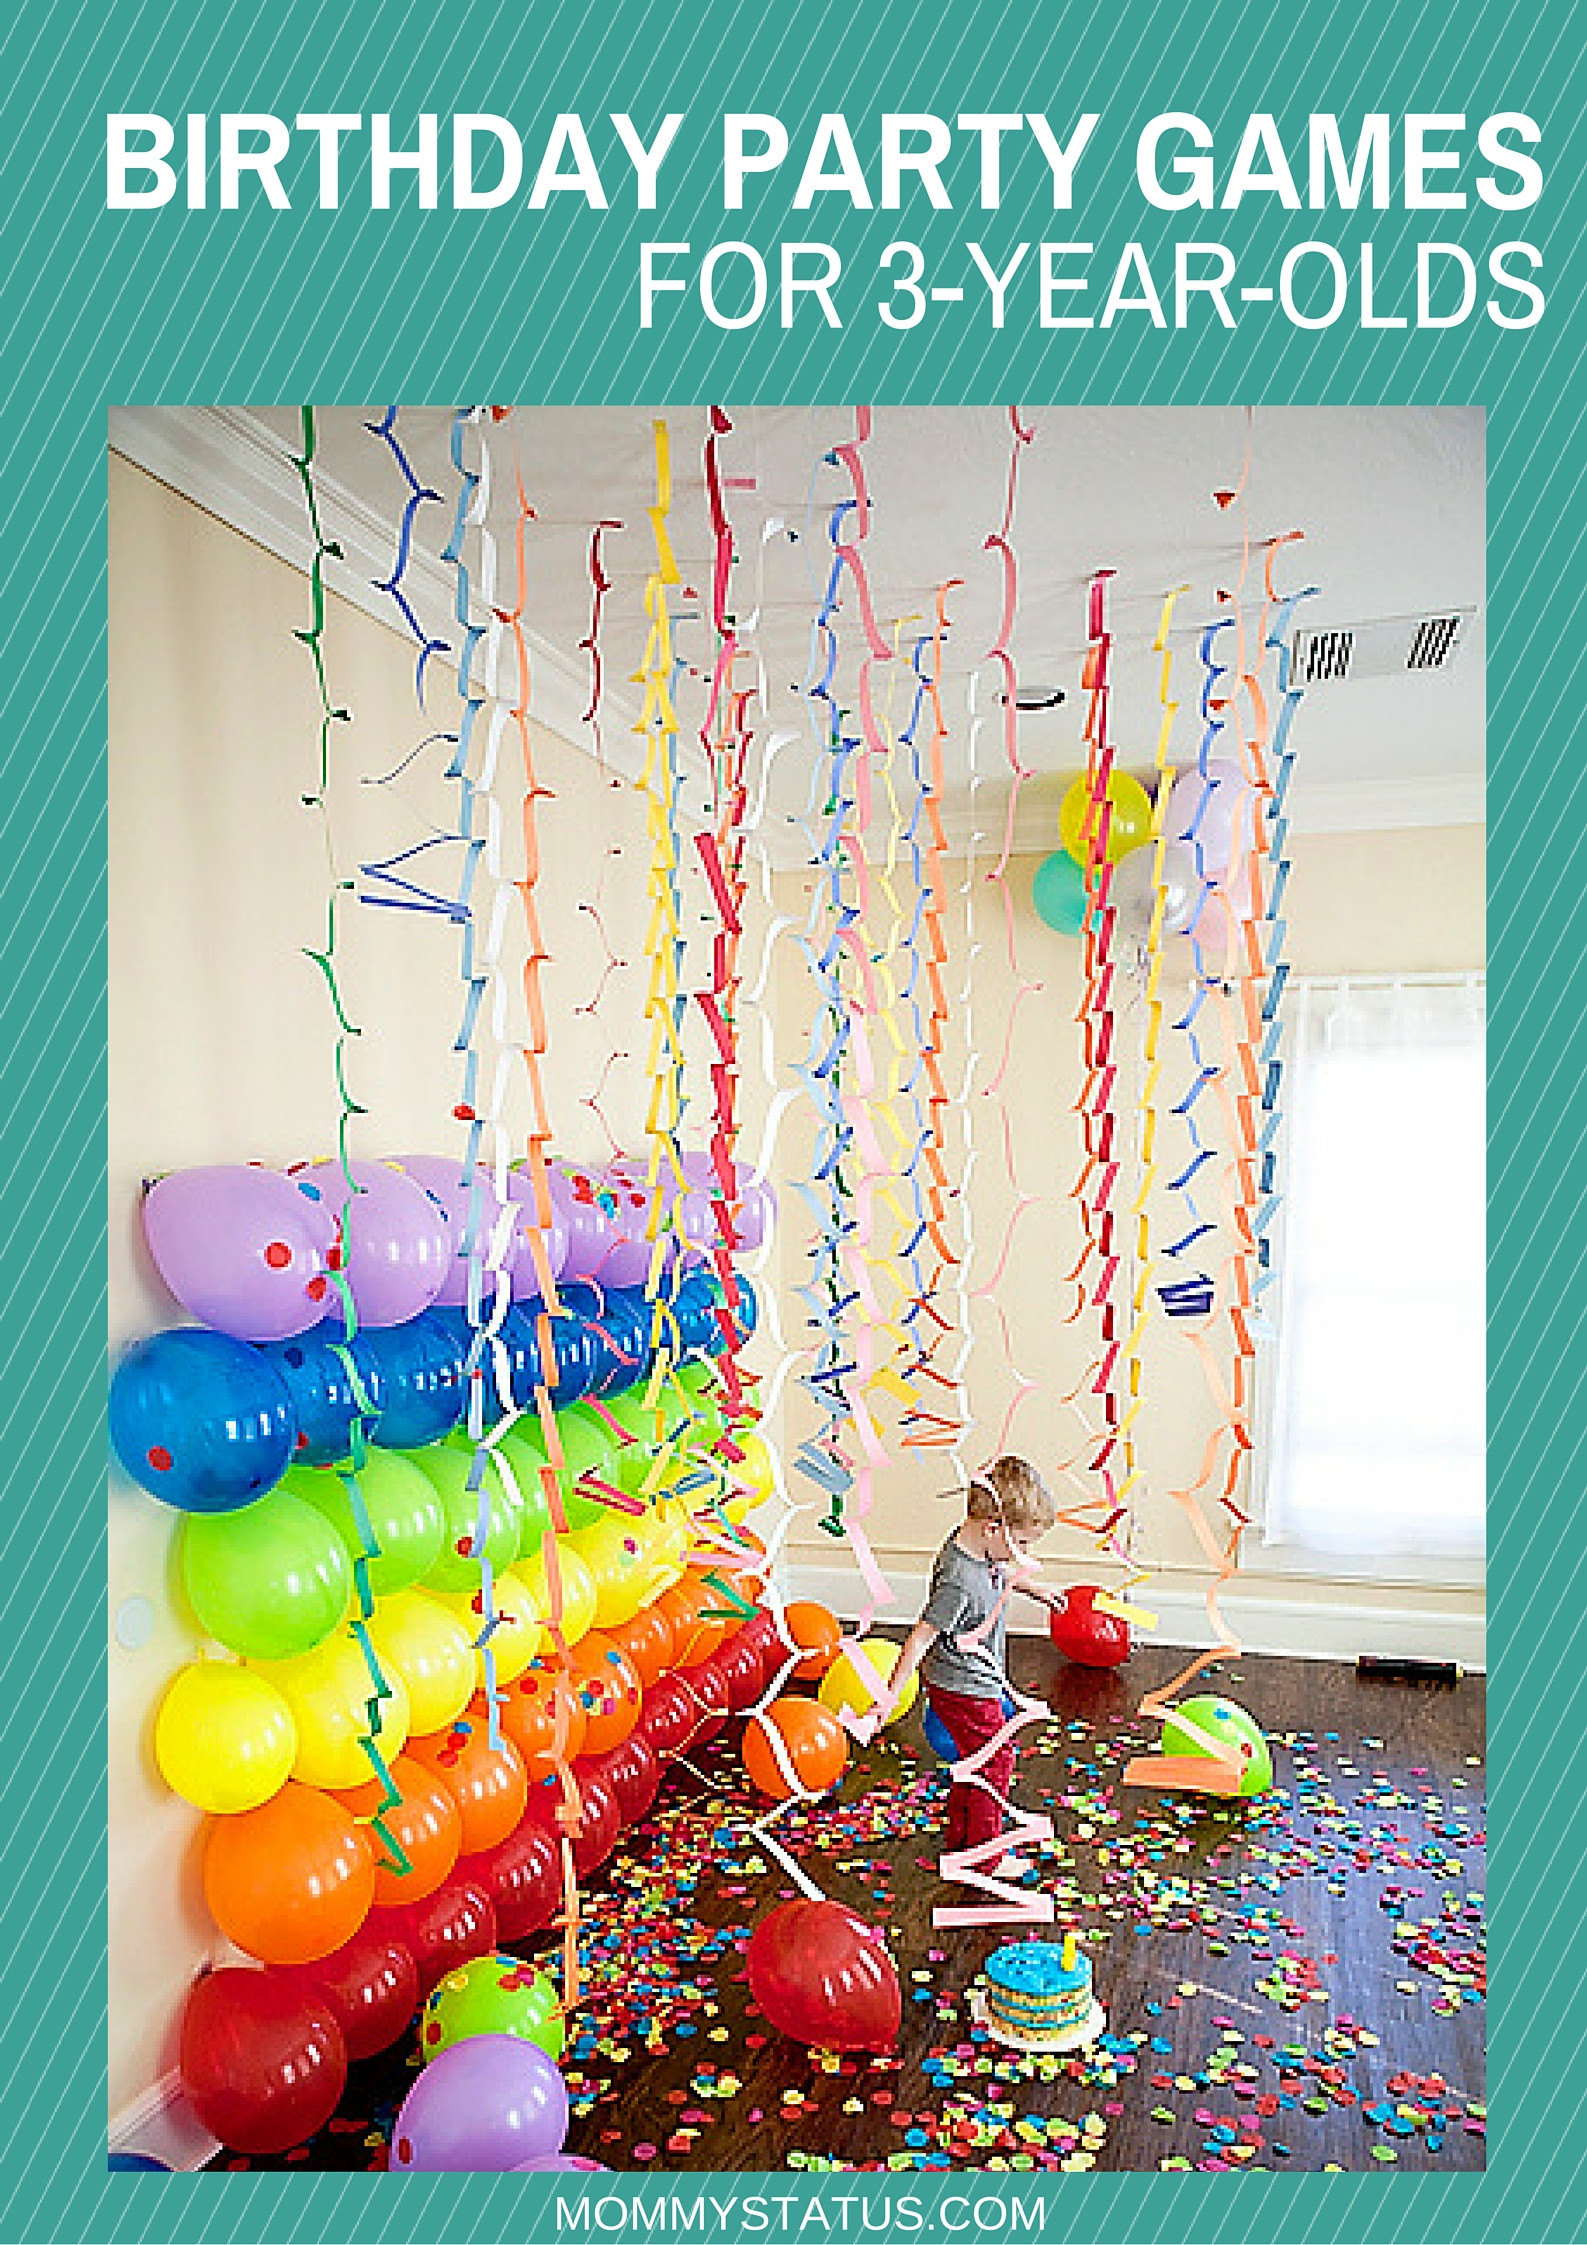 3 Year Old Boy Birthday Party Ideas
 BIRTHDAY PARTY GAMES FOR 3 YEAR OLDS Mommy Status